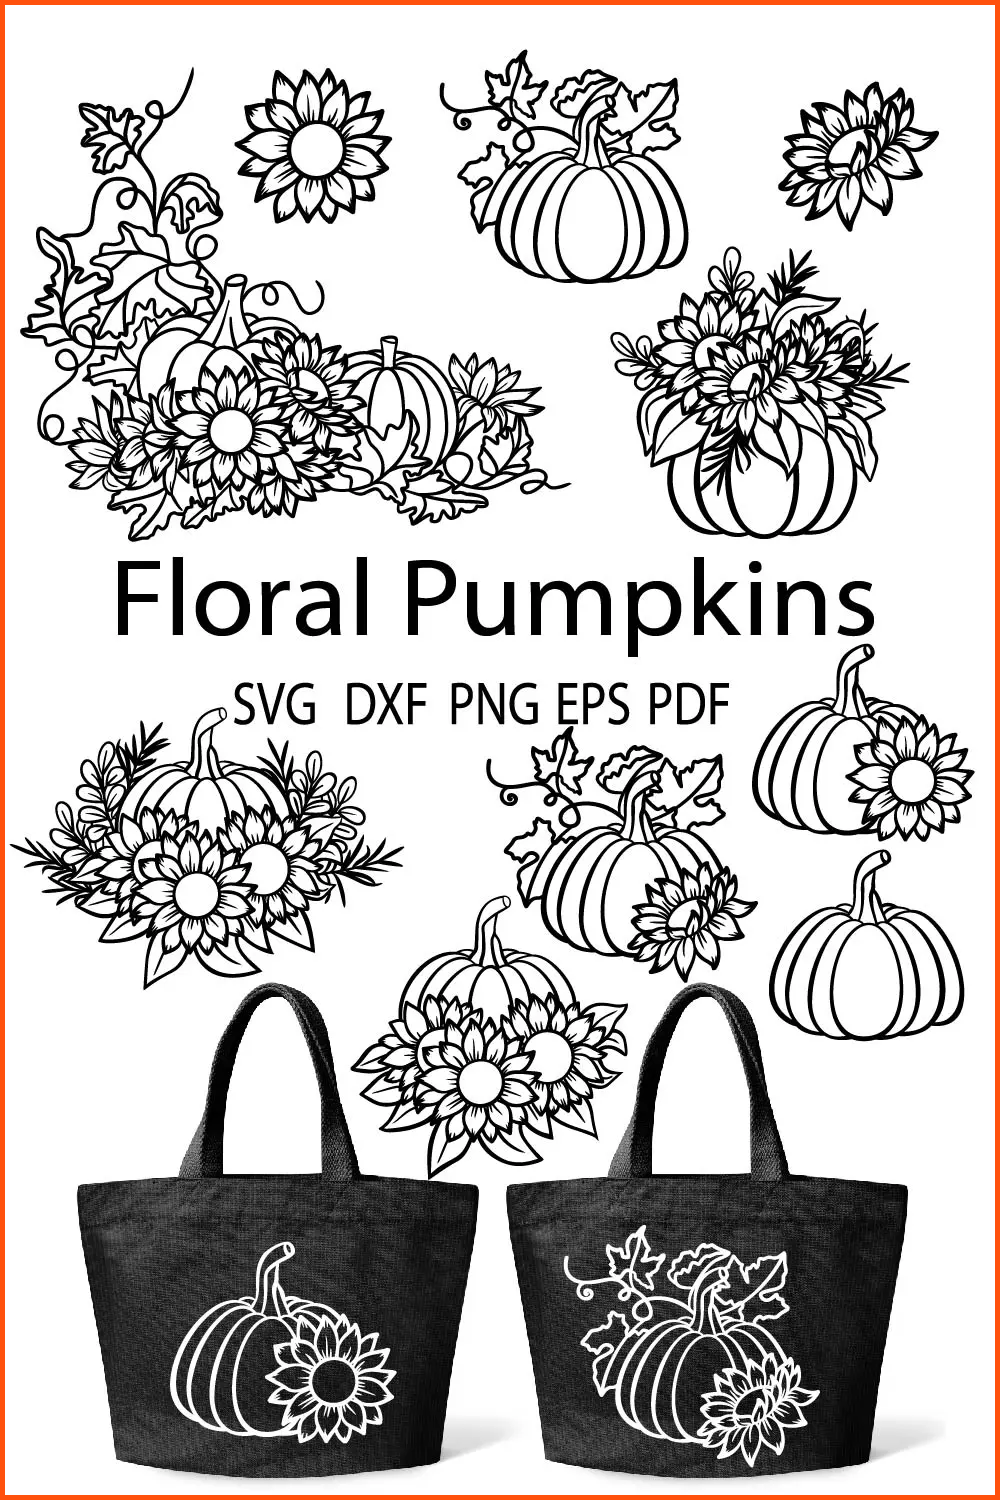 Black and white patterns of sunflowers, pumpkins, leaves and black bags with white pumpkins.